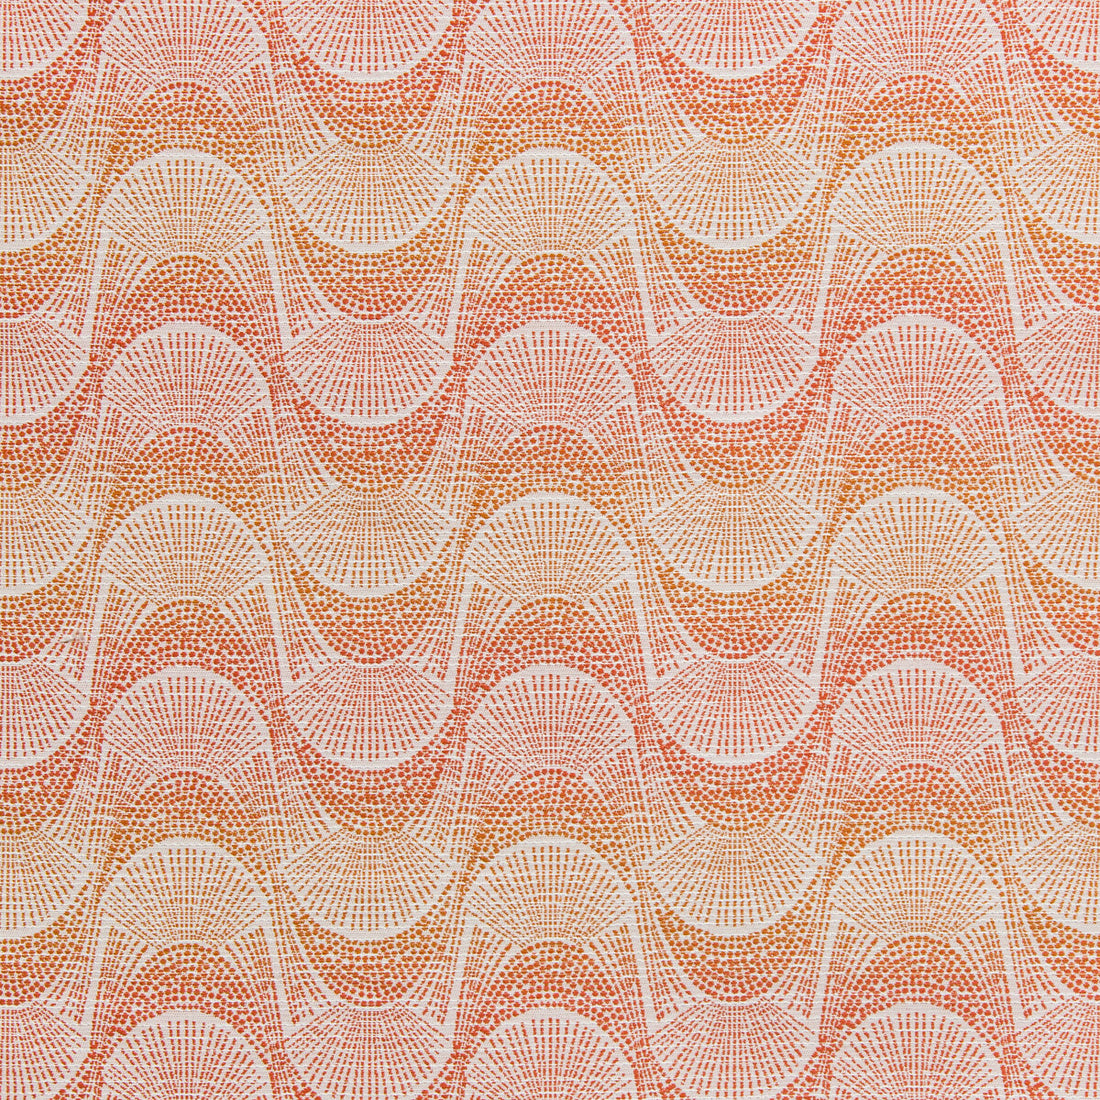 Tofino fabric in mandarin color - pattern 35835.12.0 - by Kravet Design in the Indoor / Outdoor collection